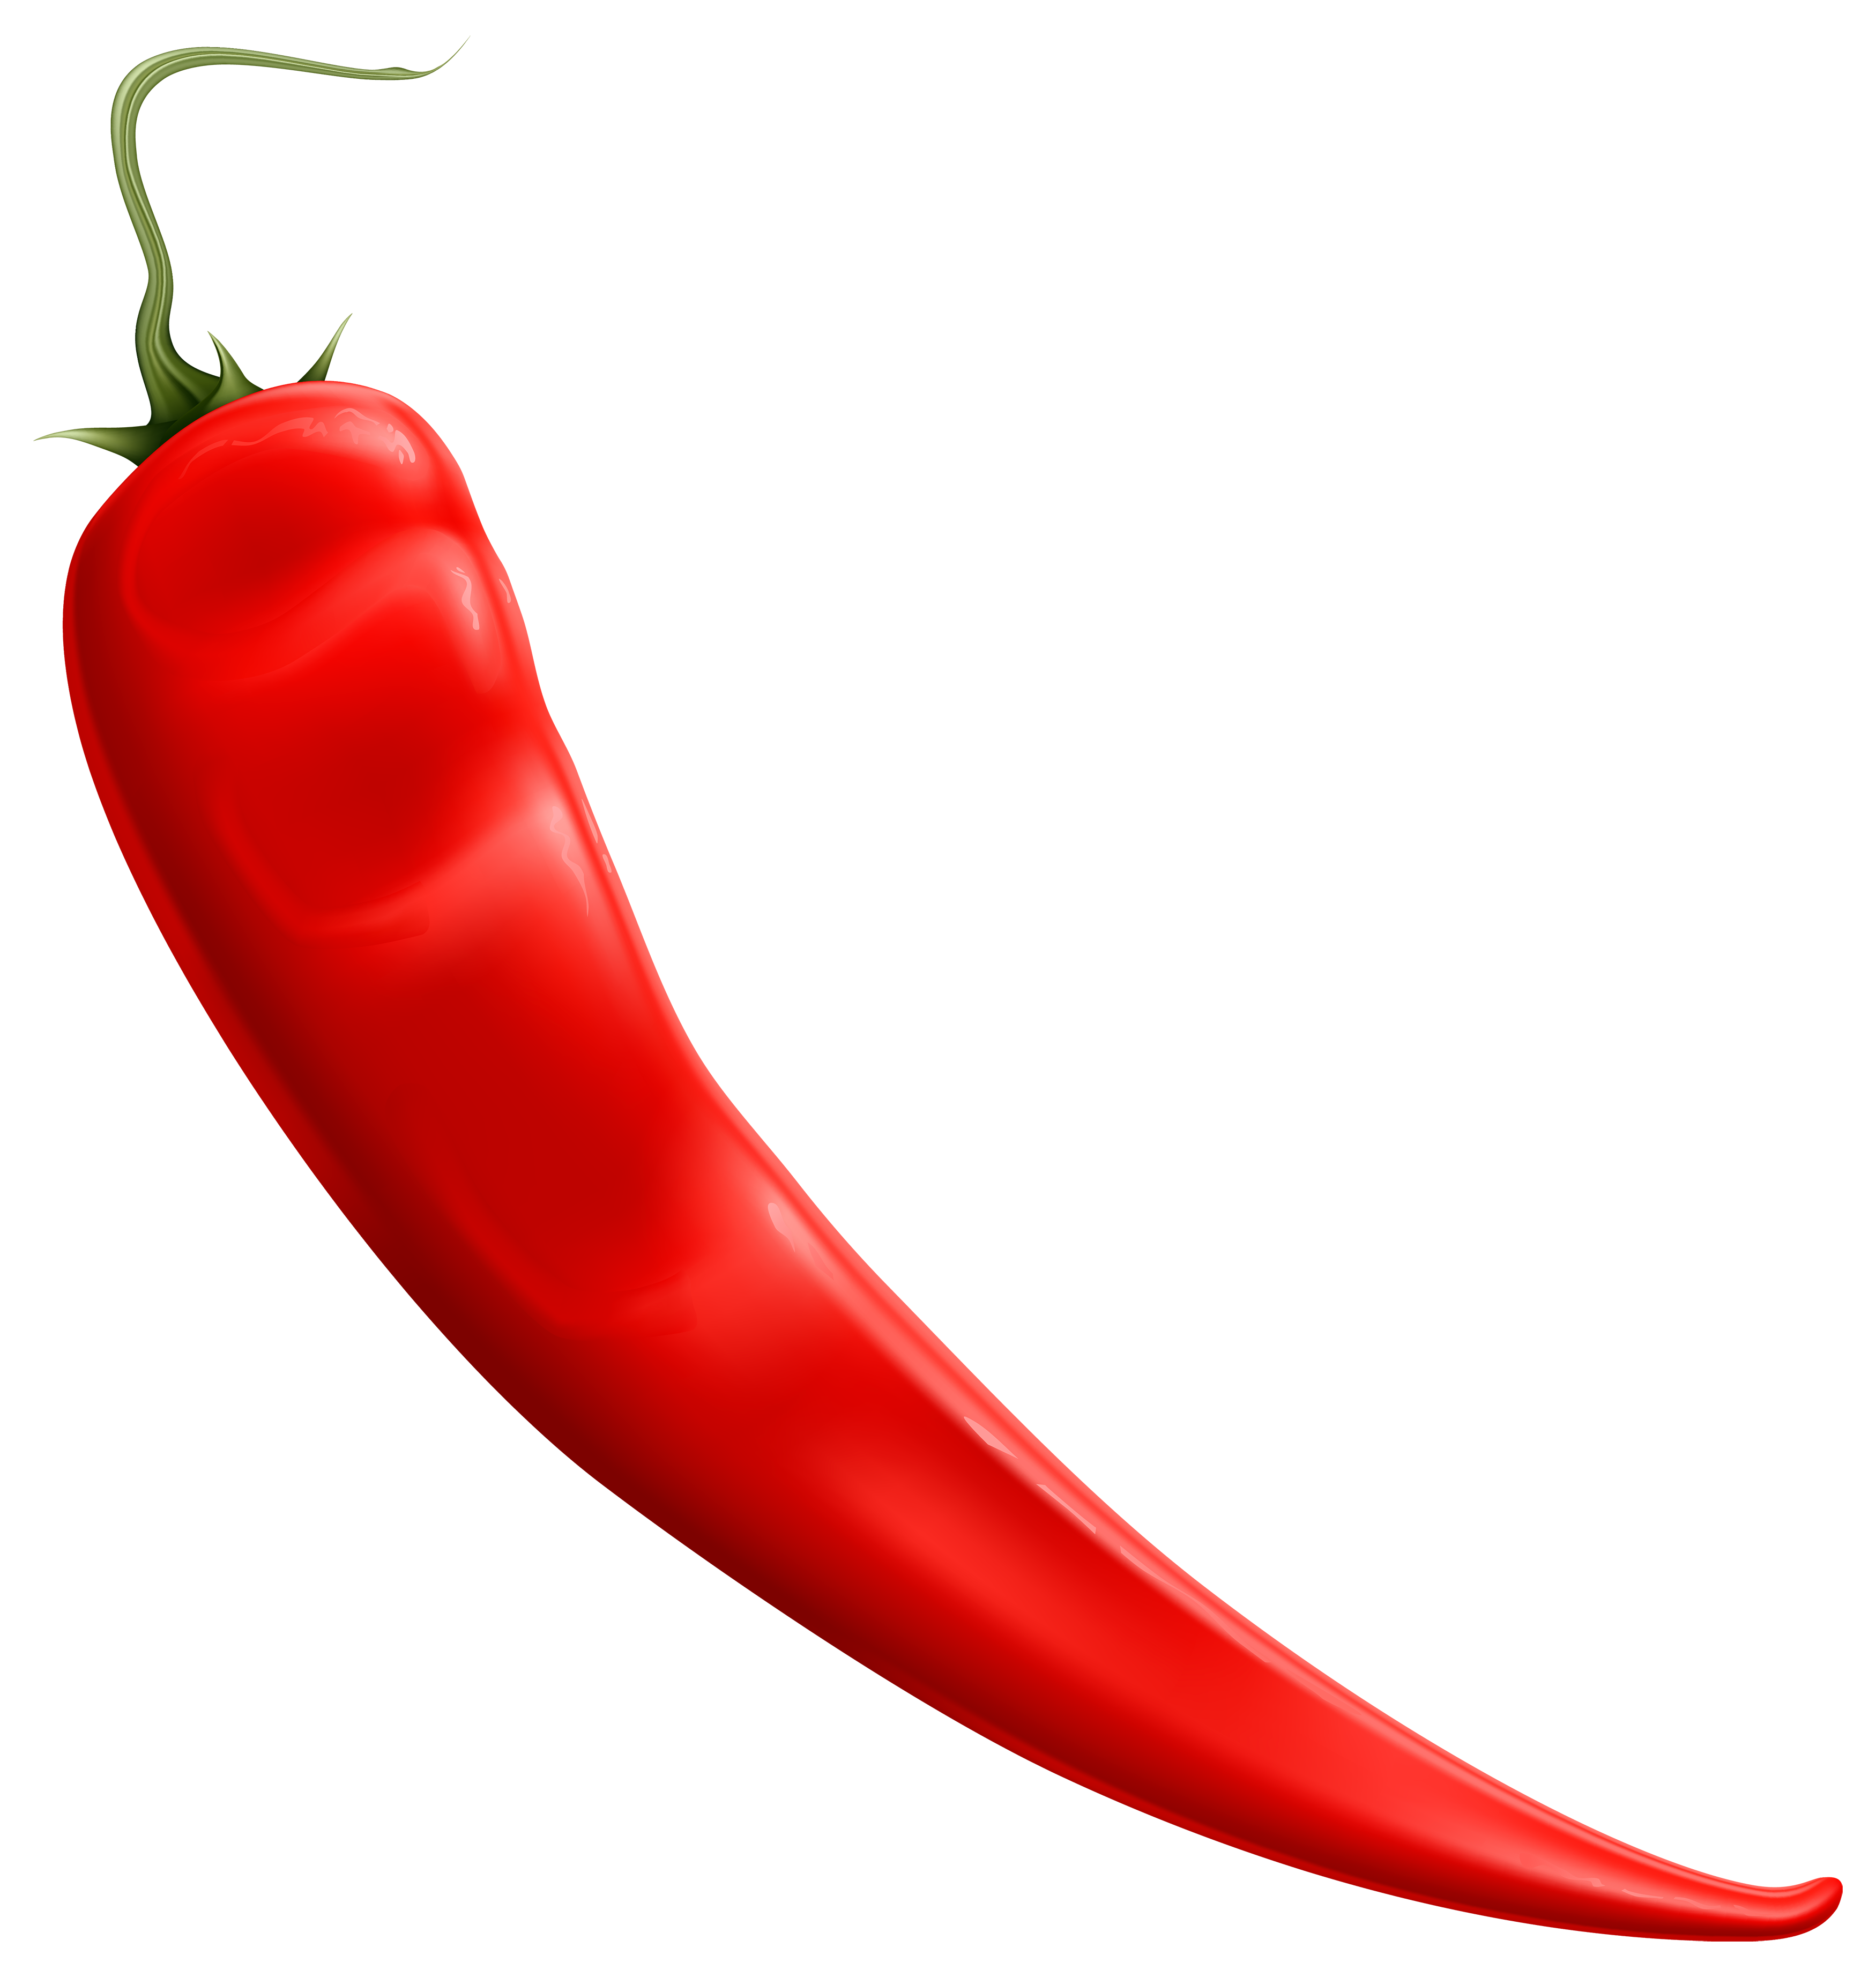 Chili clip art graphic of a red chilli pepper cartoon character ...